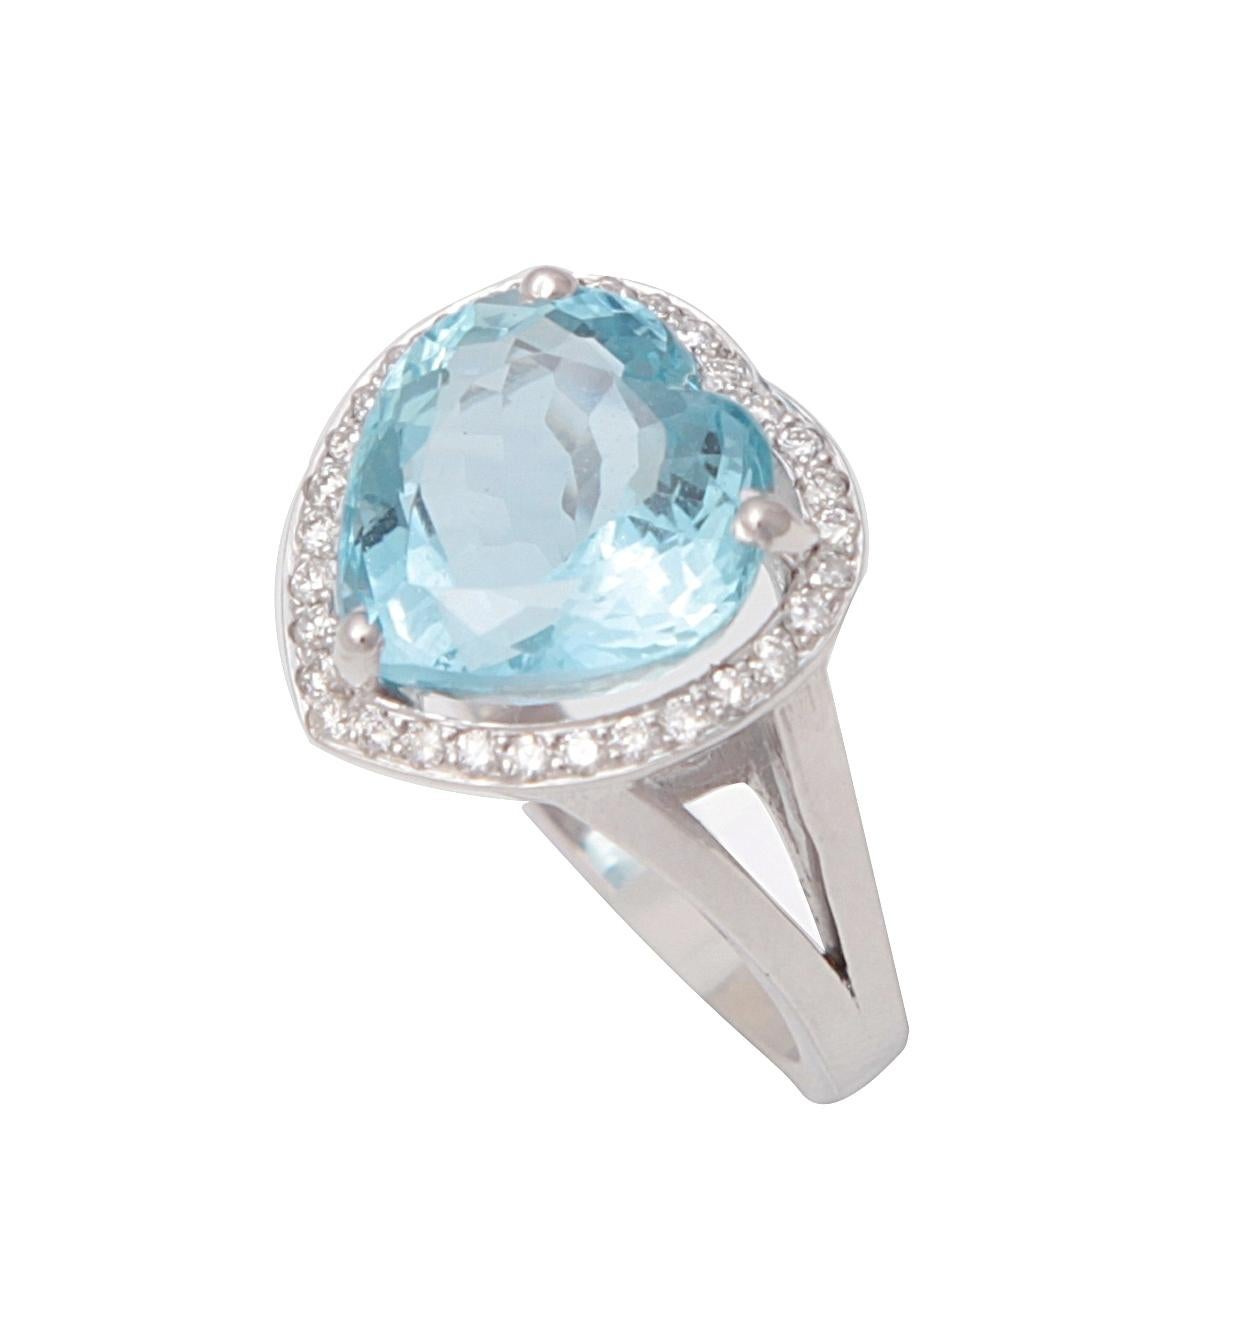 A fine and original ring with a central heart shaped aquamarine surrounded by 35 round cut diamonds.

18K White Gold, 750/1000eme. Eagle's head hallmark

Aquamarine's Weight: 5.95 carats

Diamonds' weight: 0.35 carats

Size FR 52 / US 6